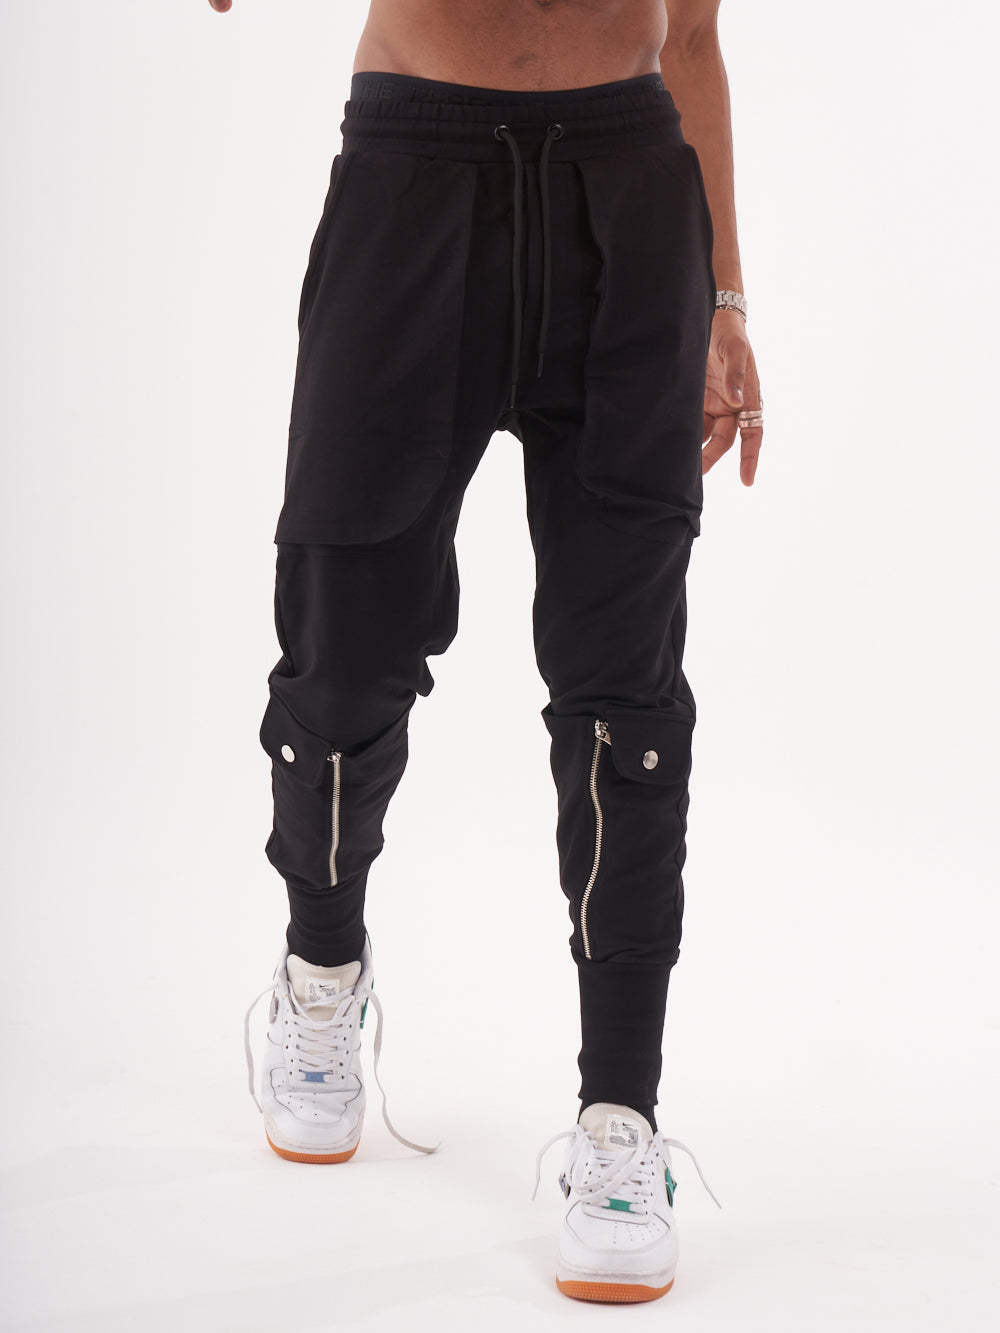 A man wearing GUERRILLA | BLACK joggers with zippers.